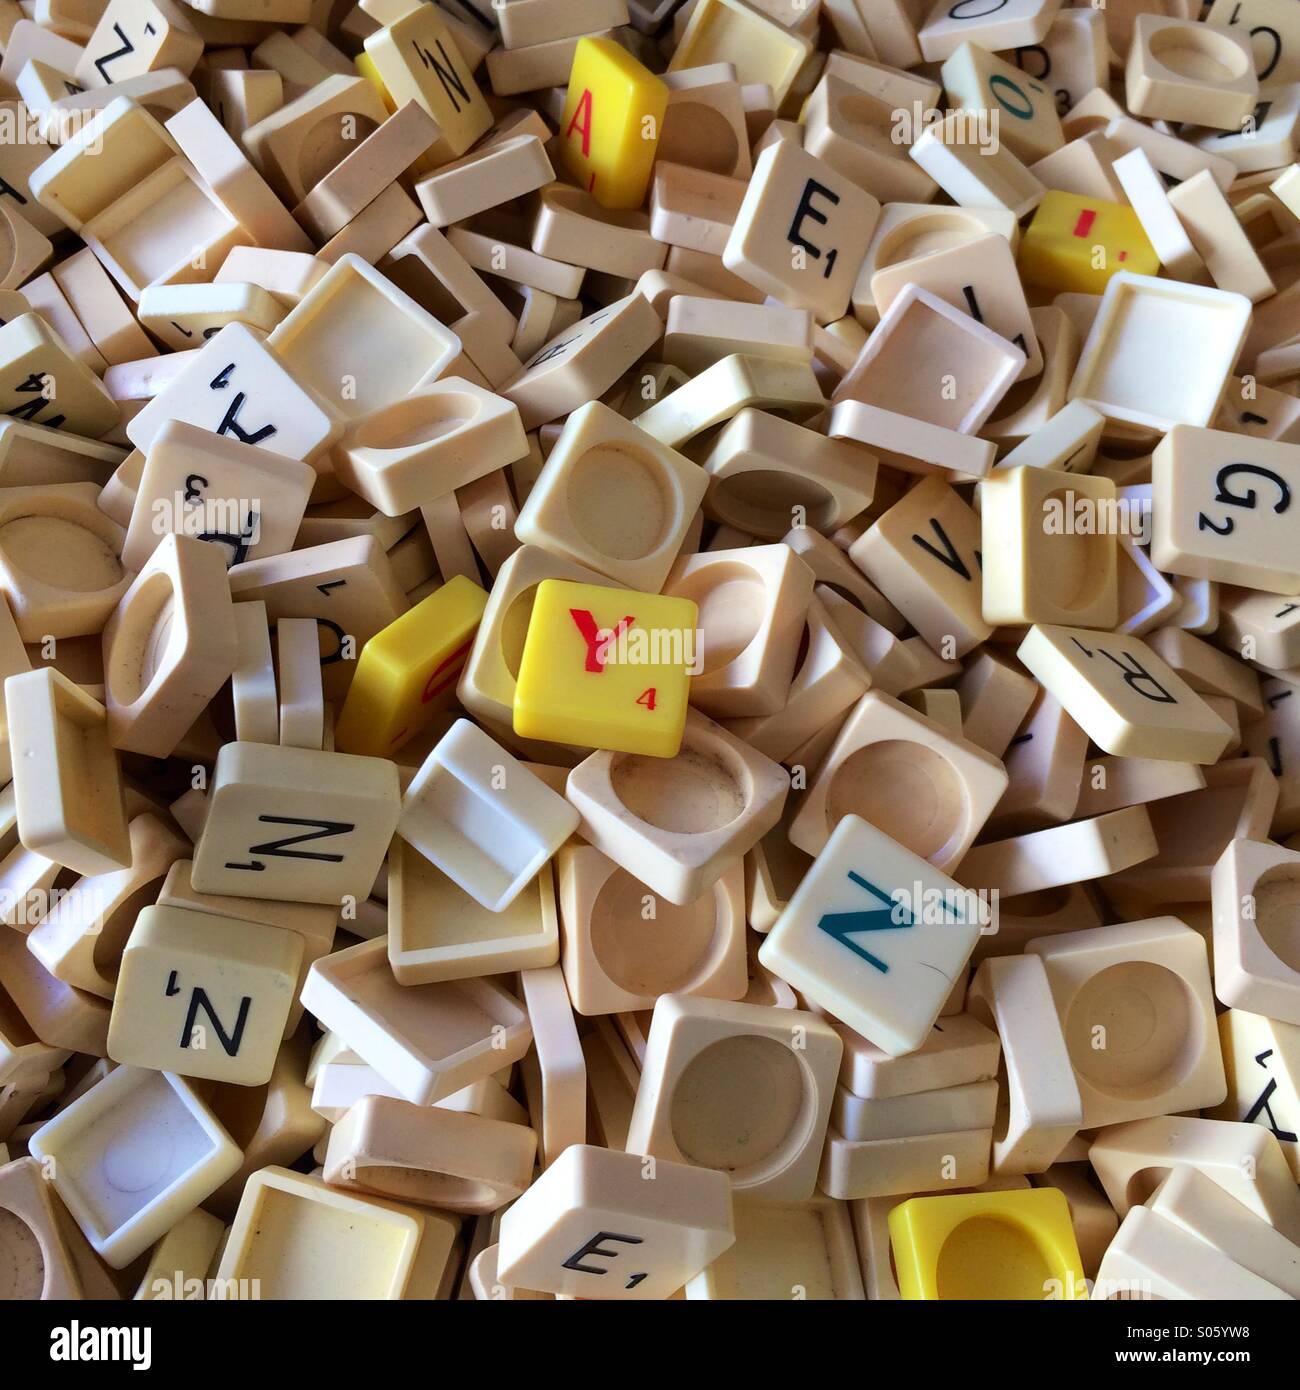 Scrabble letters in a pile Stock Photo